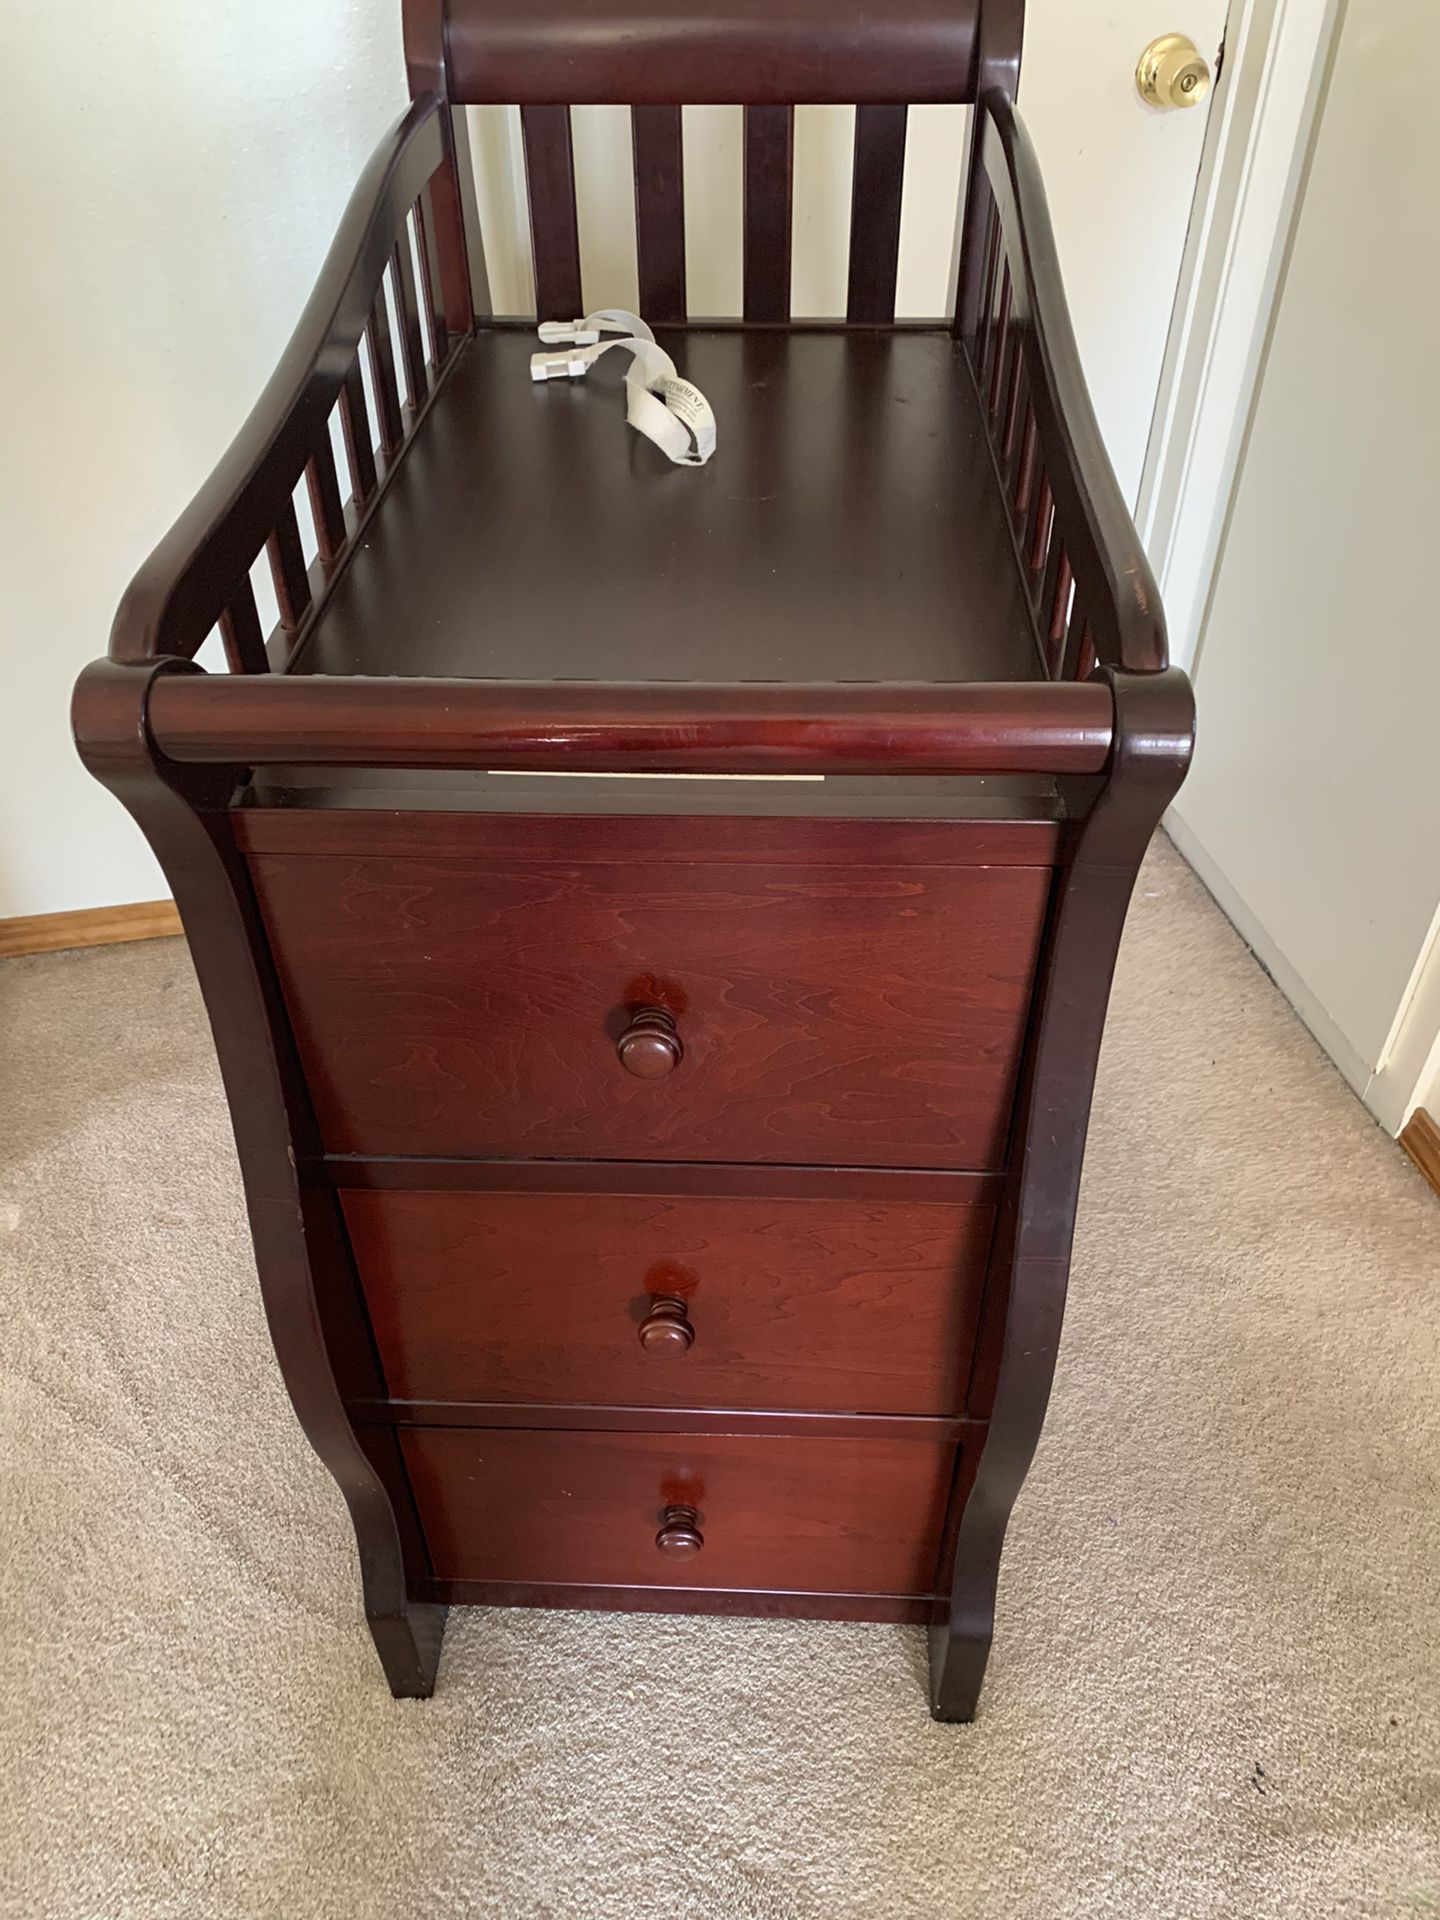 Baby bed /changing station with safety and storage